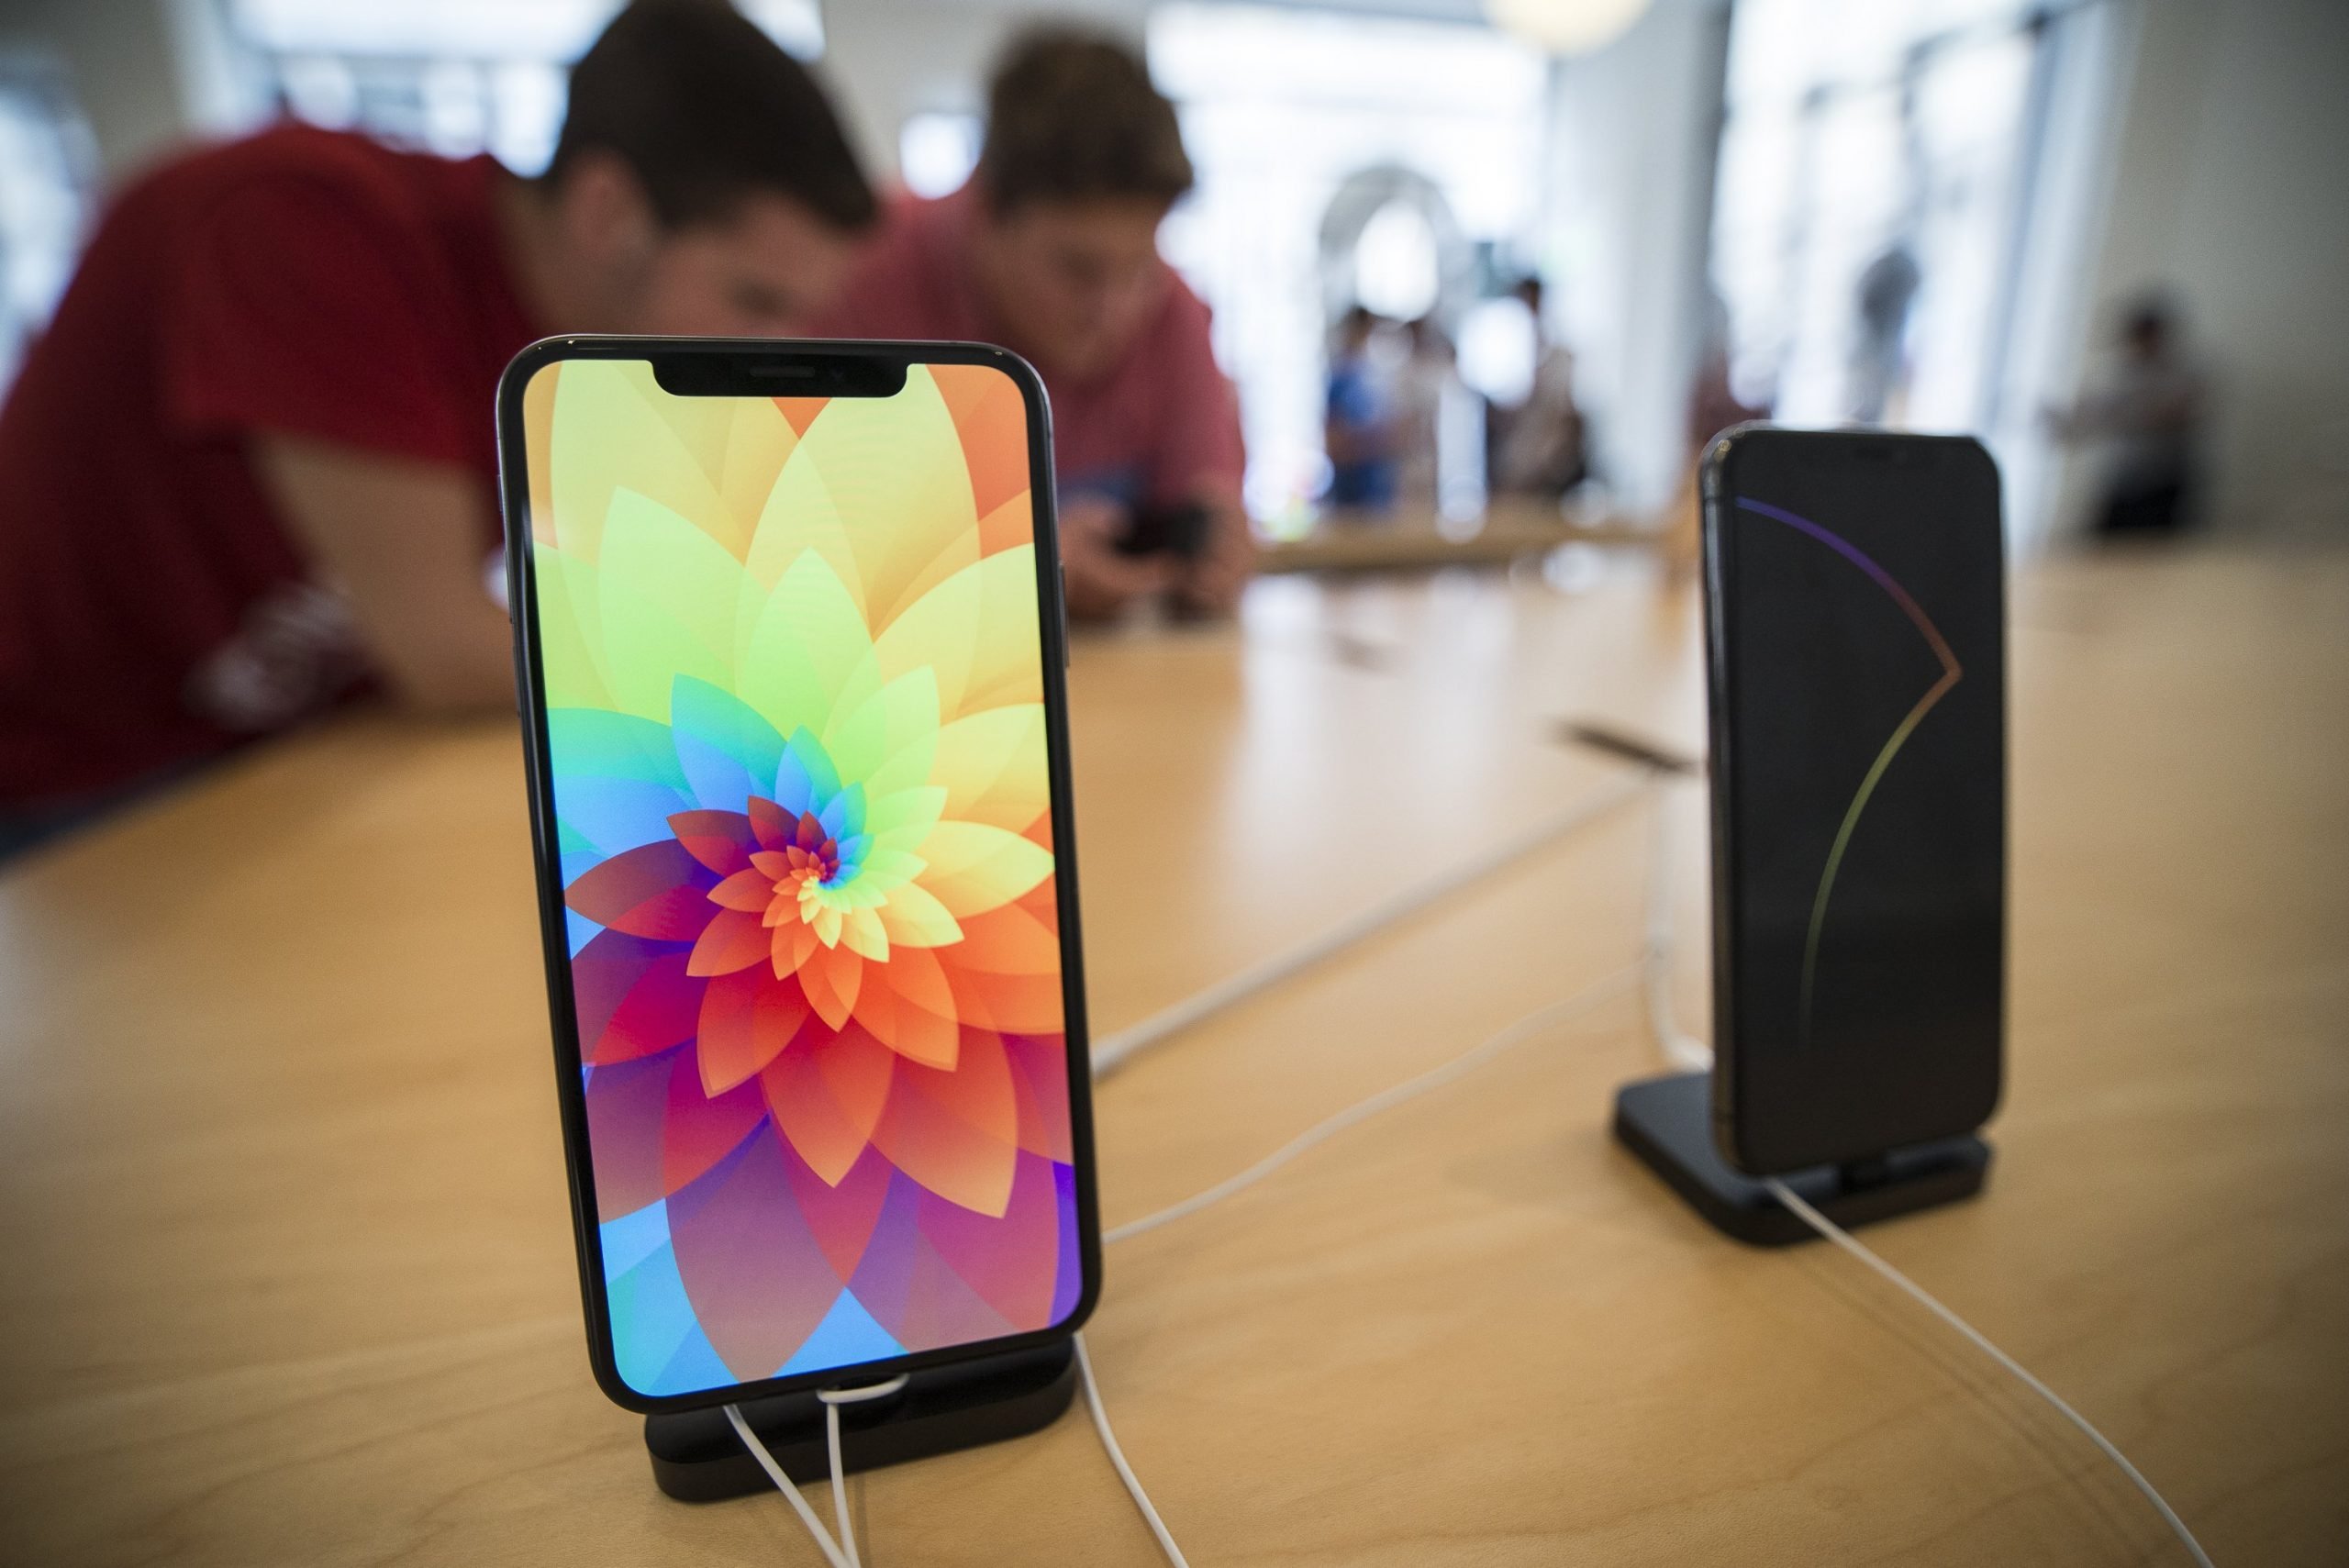 How Long Does It Take to Fully Charge iPhone XS?